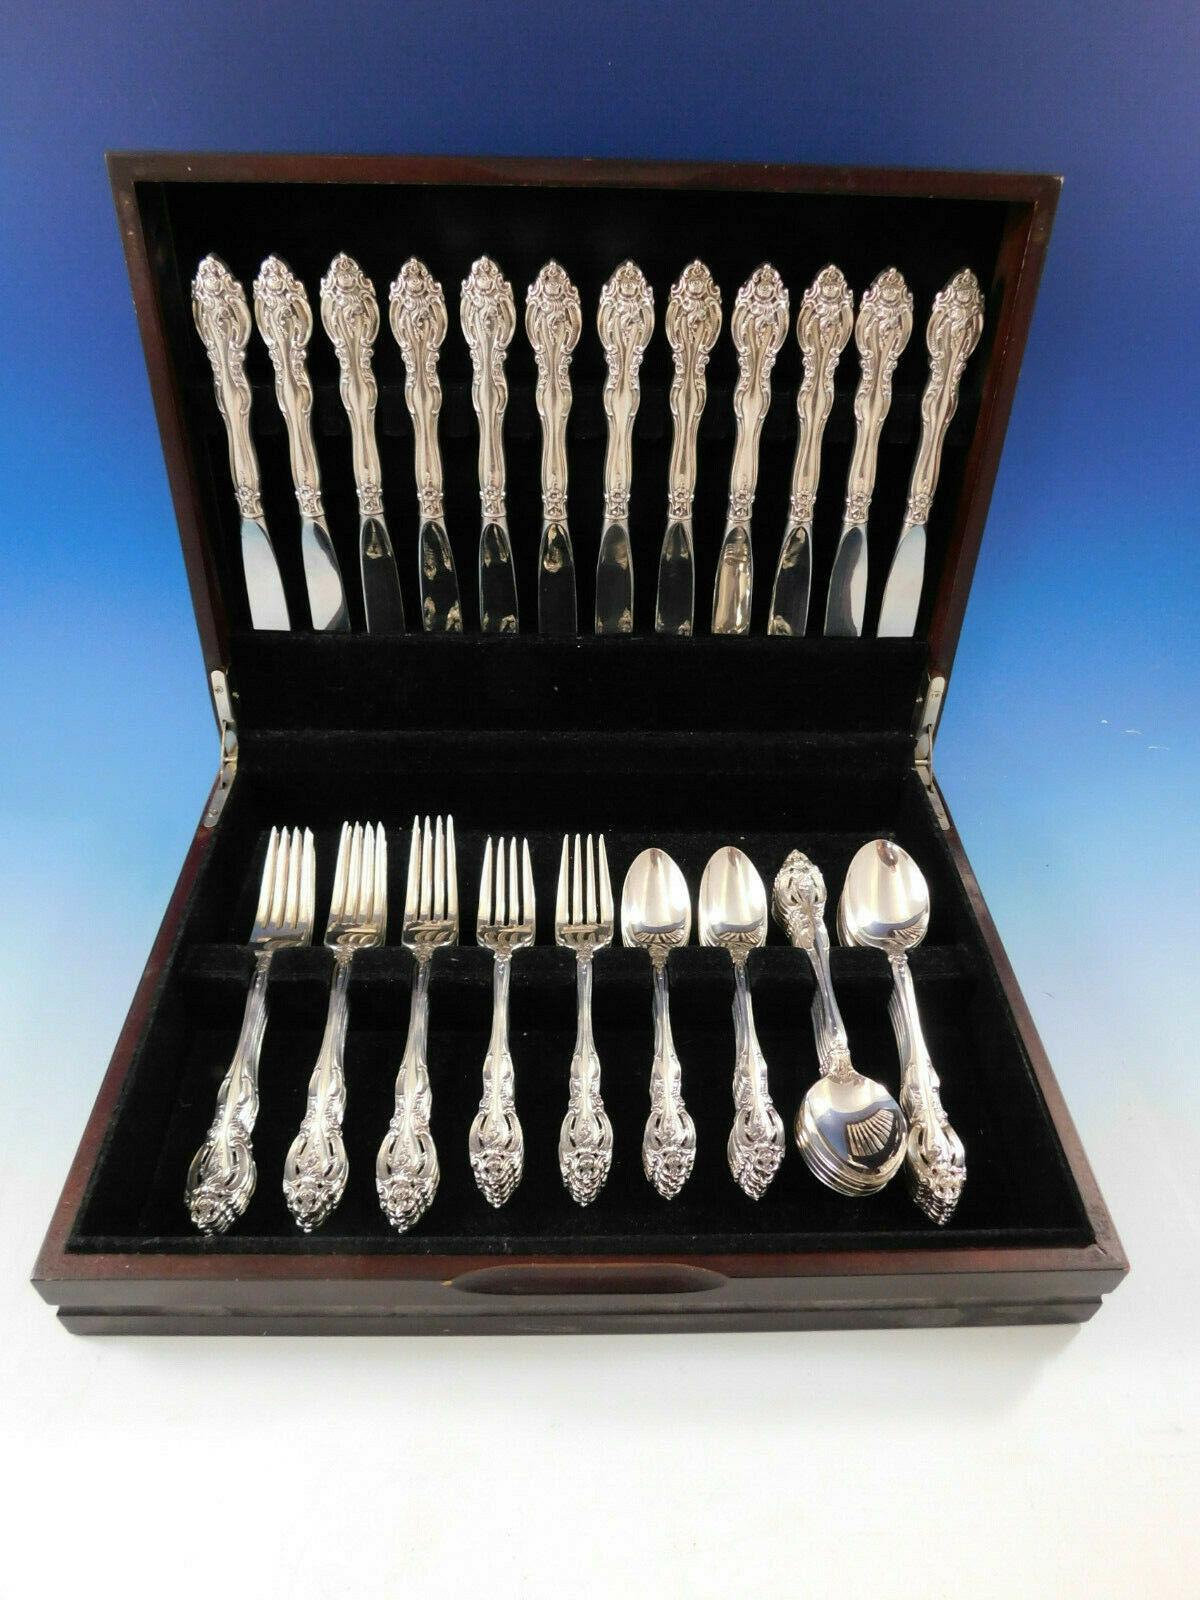 La Scala by Gorham sterling silver flatware set - 60 pieces. This set includes:

12 knives, 9